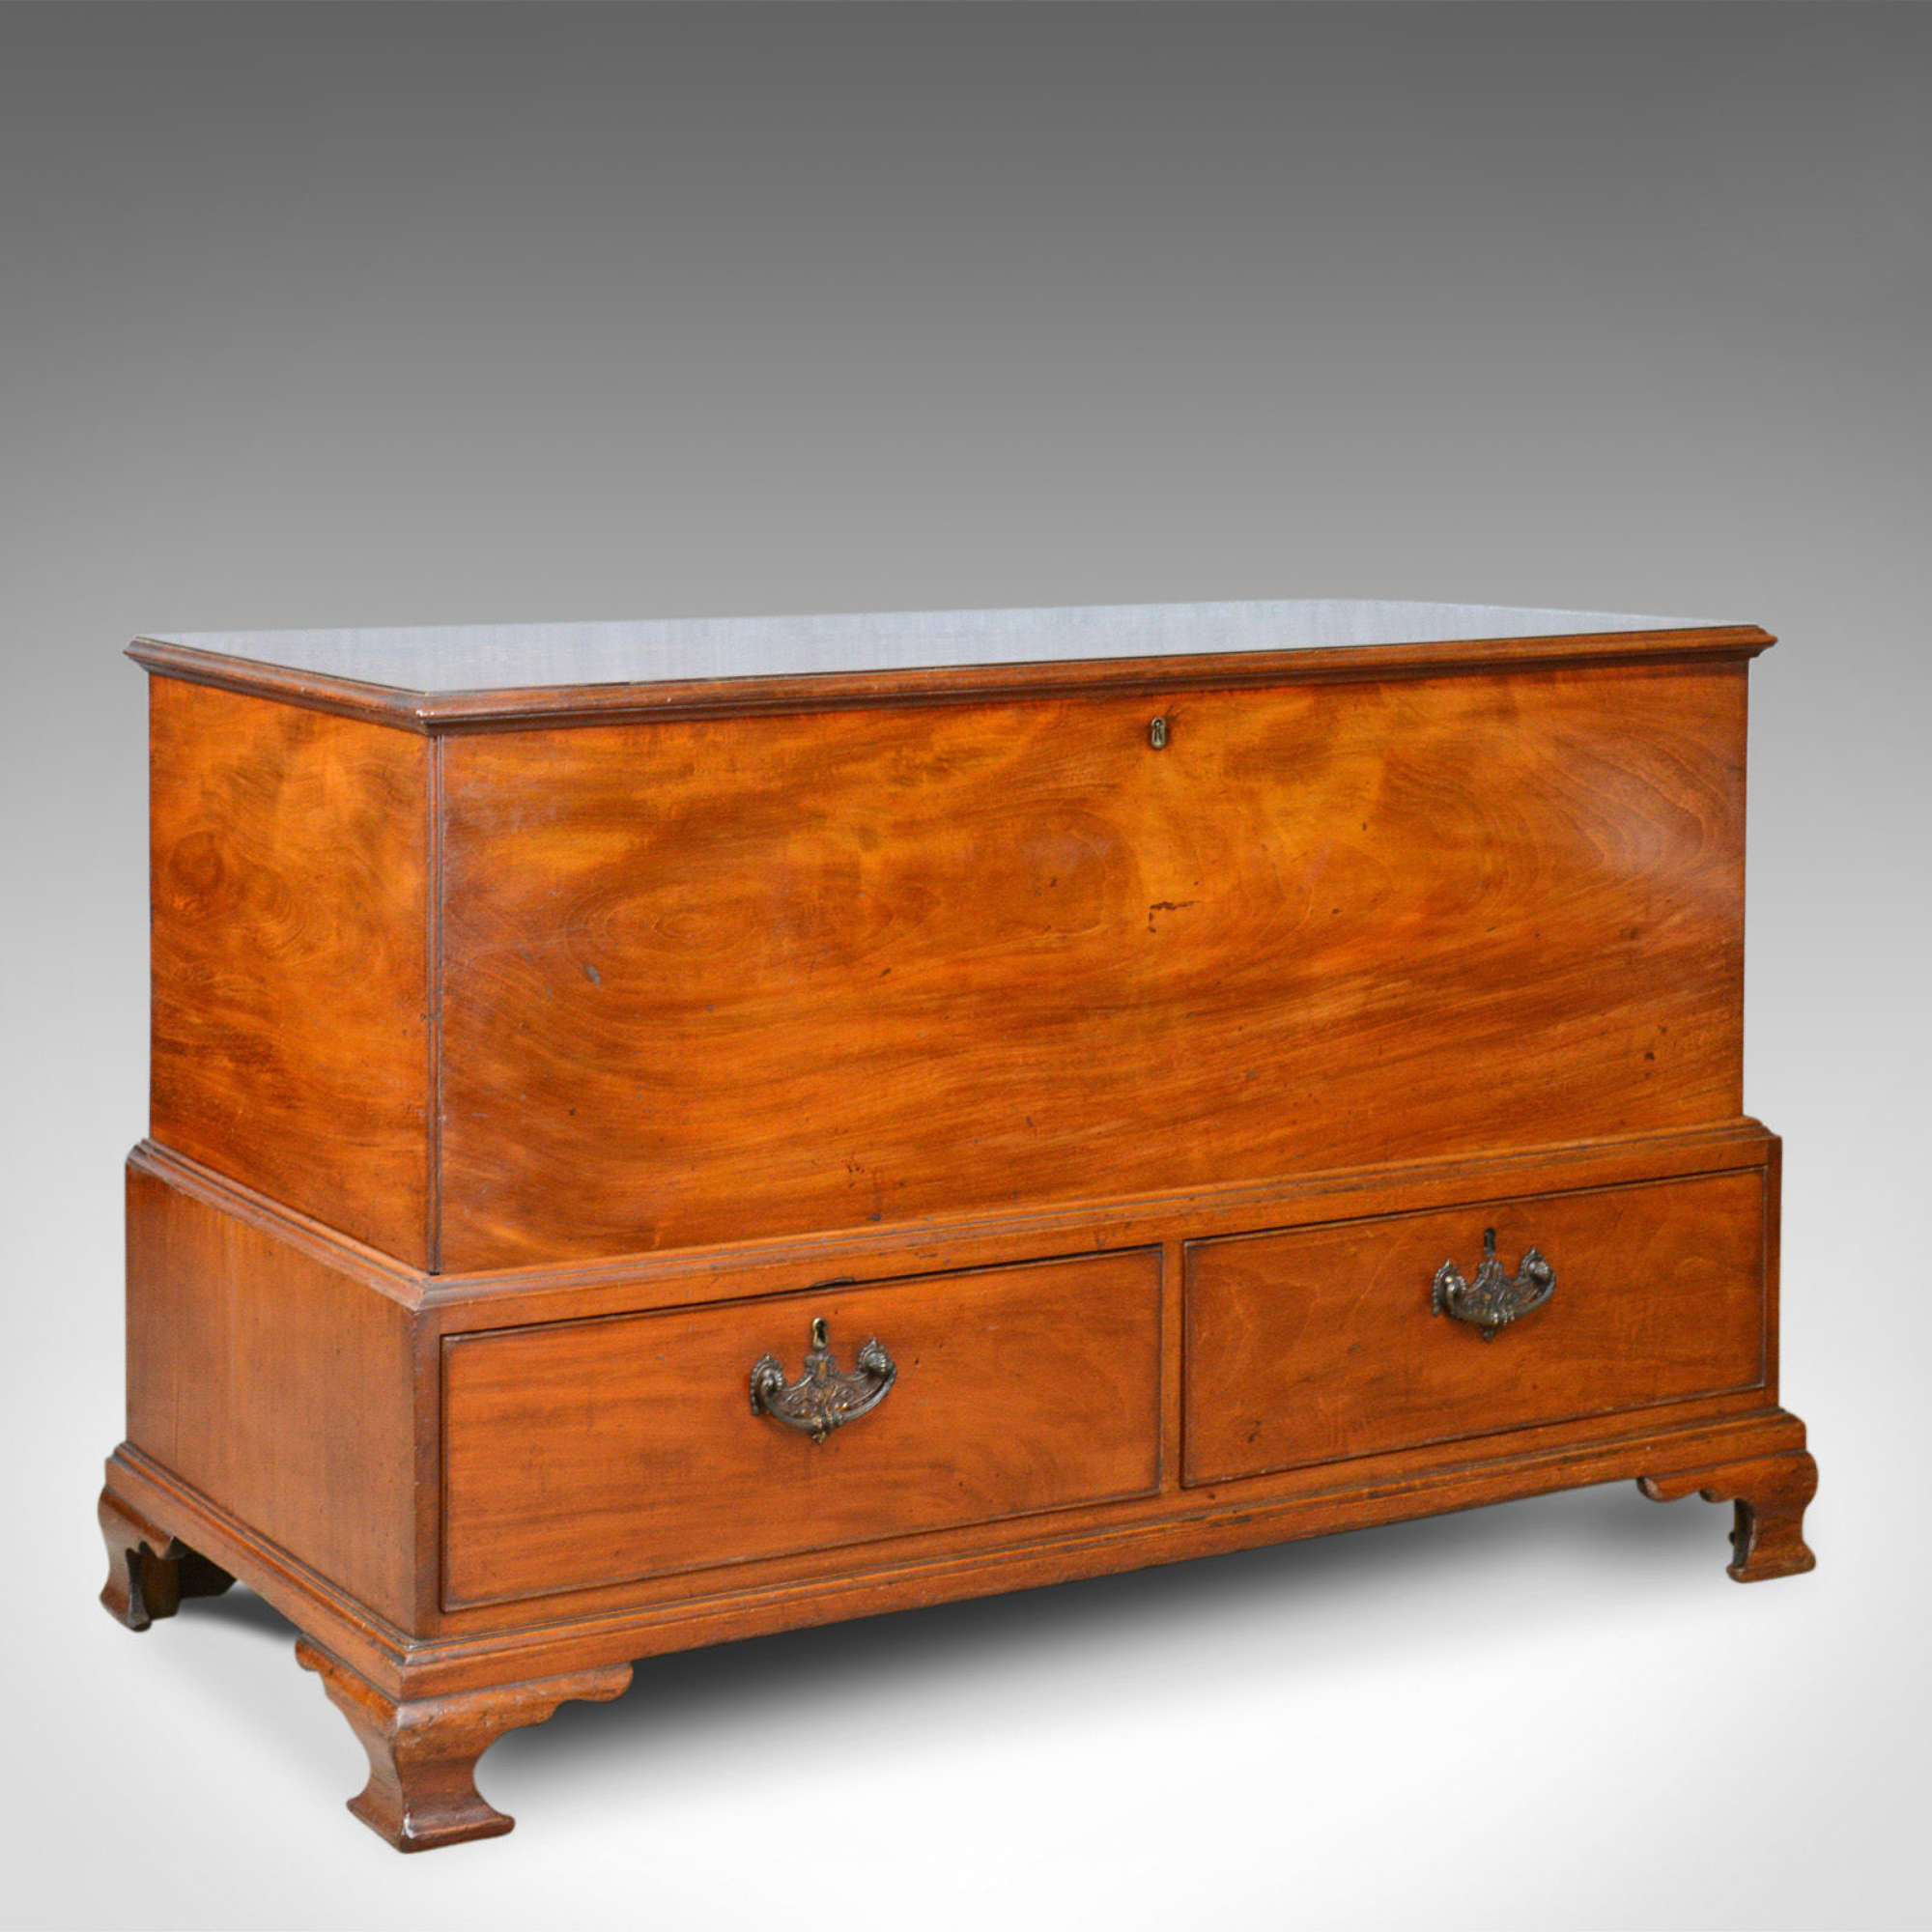 Antique, Mule Chest, English, Georgian Housekeepers Trunk, Mahogany C.1780